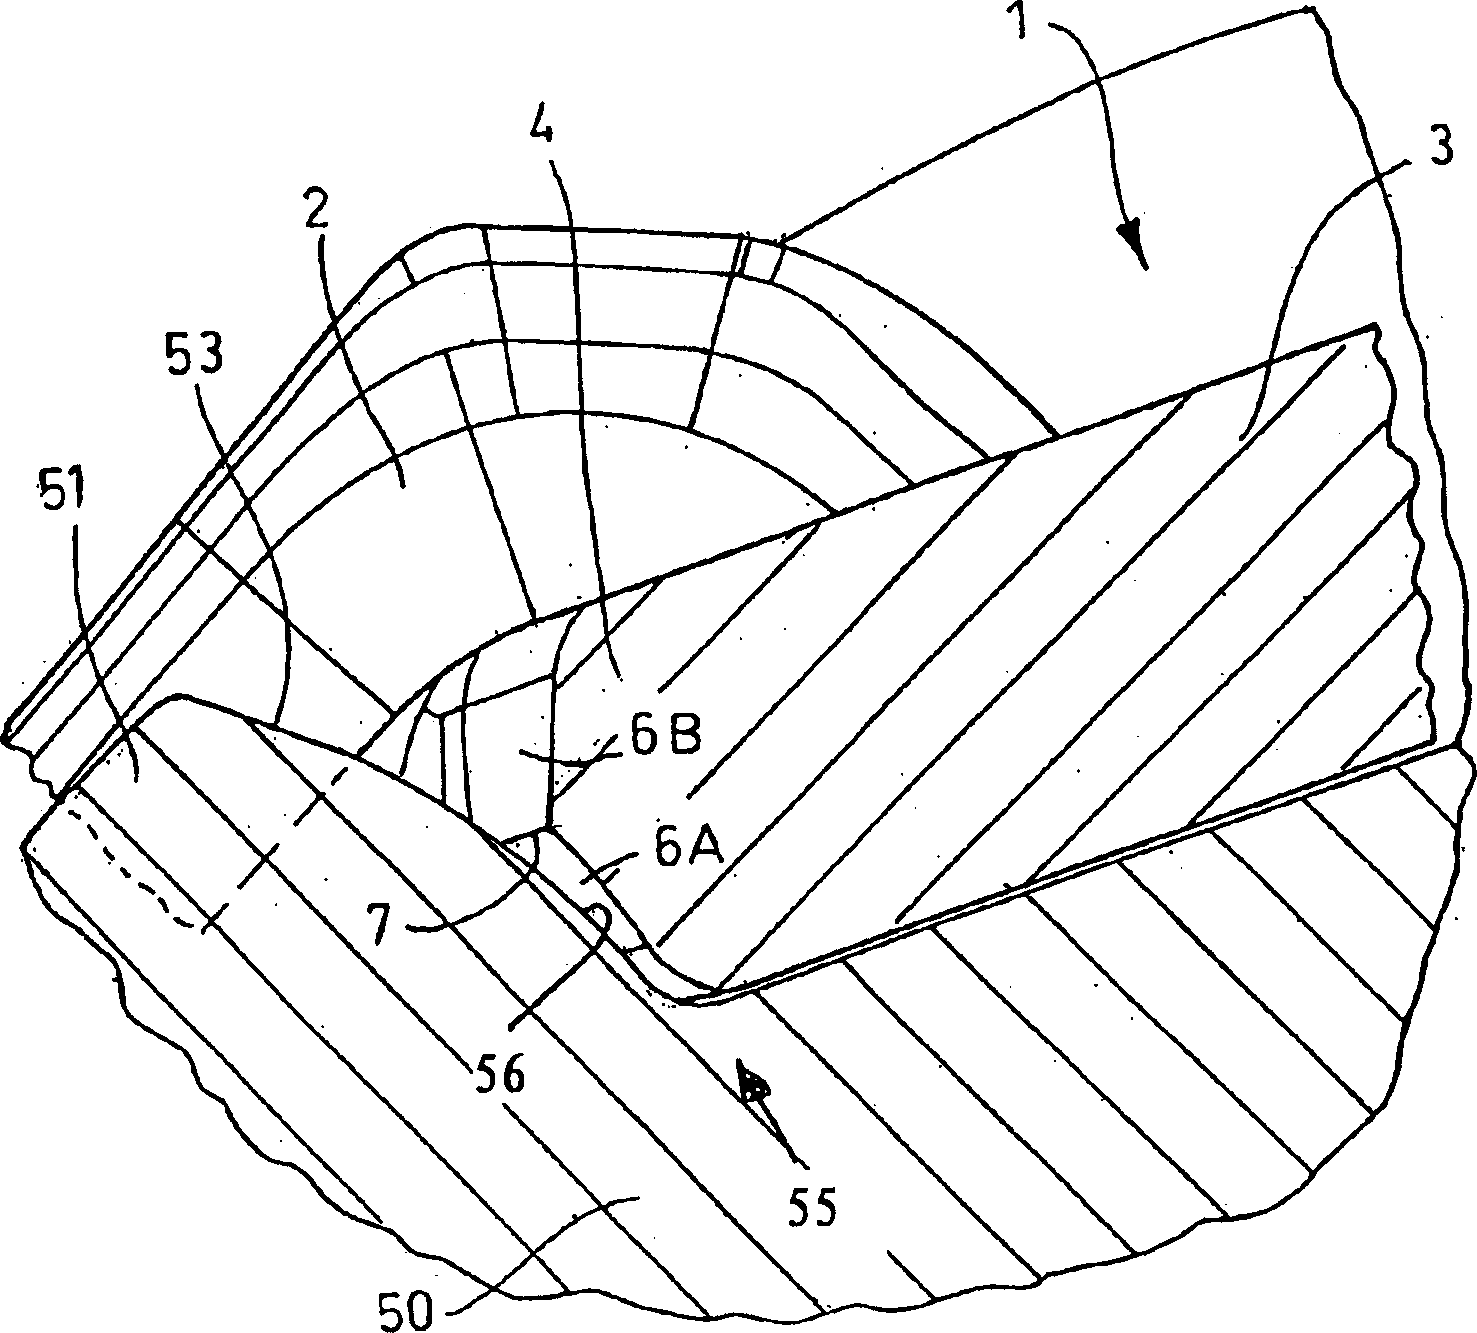 Chain transmission or steering device and the chain or chain wheel used therein